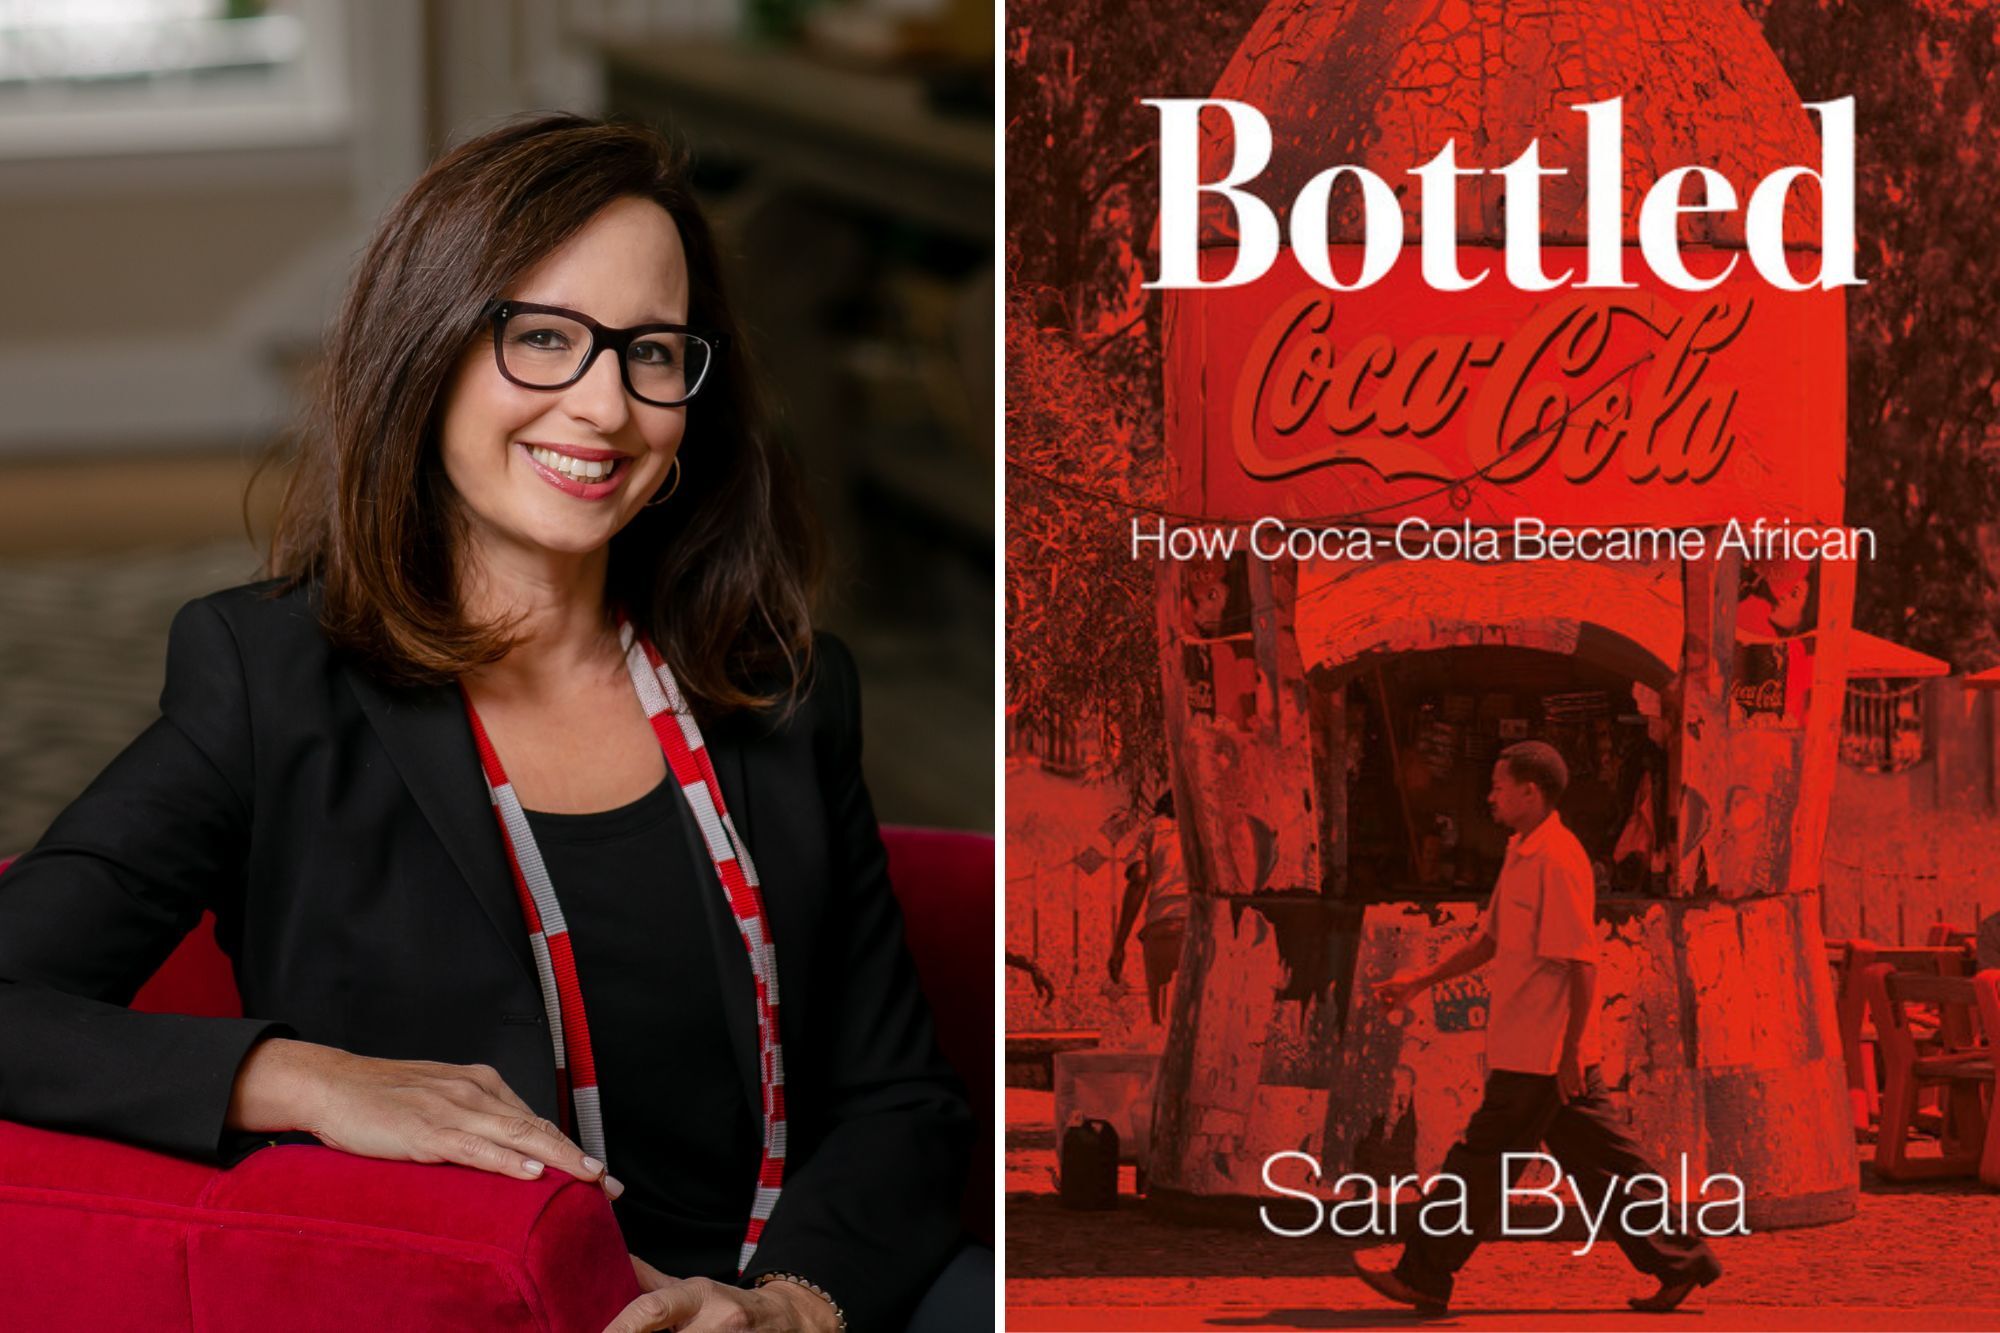 Sara Byala portrait and book cover for Bottled How Coca-Cola Became African by Sara Byala